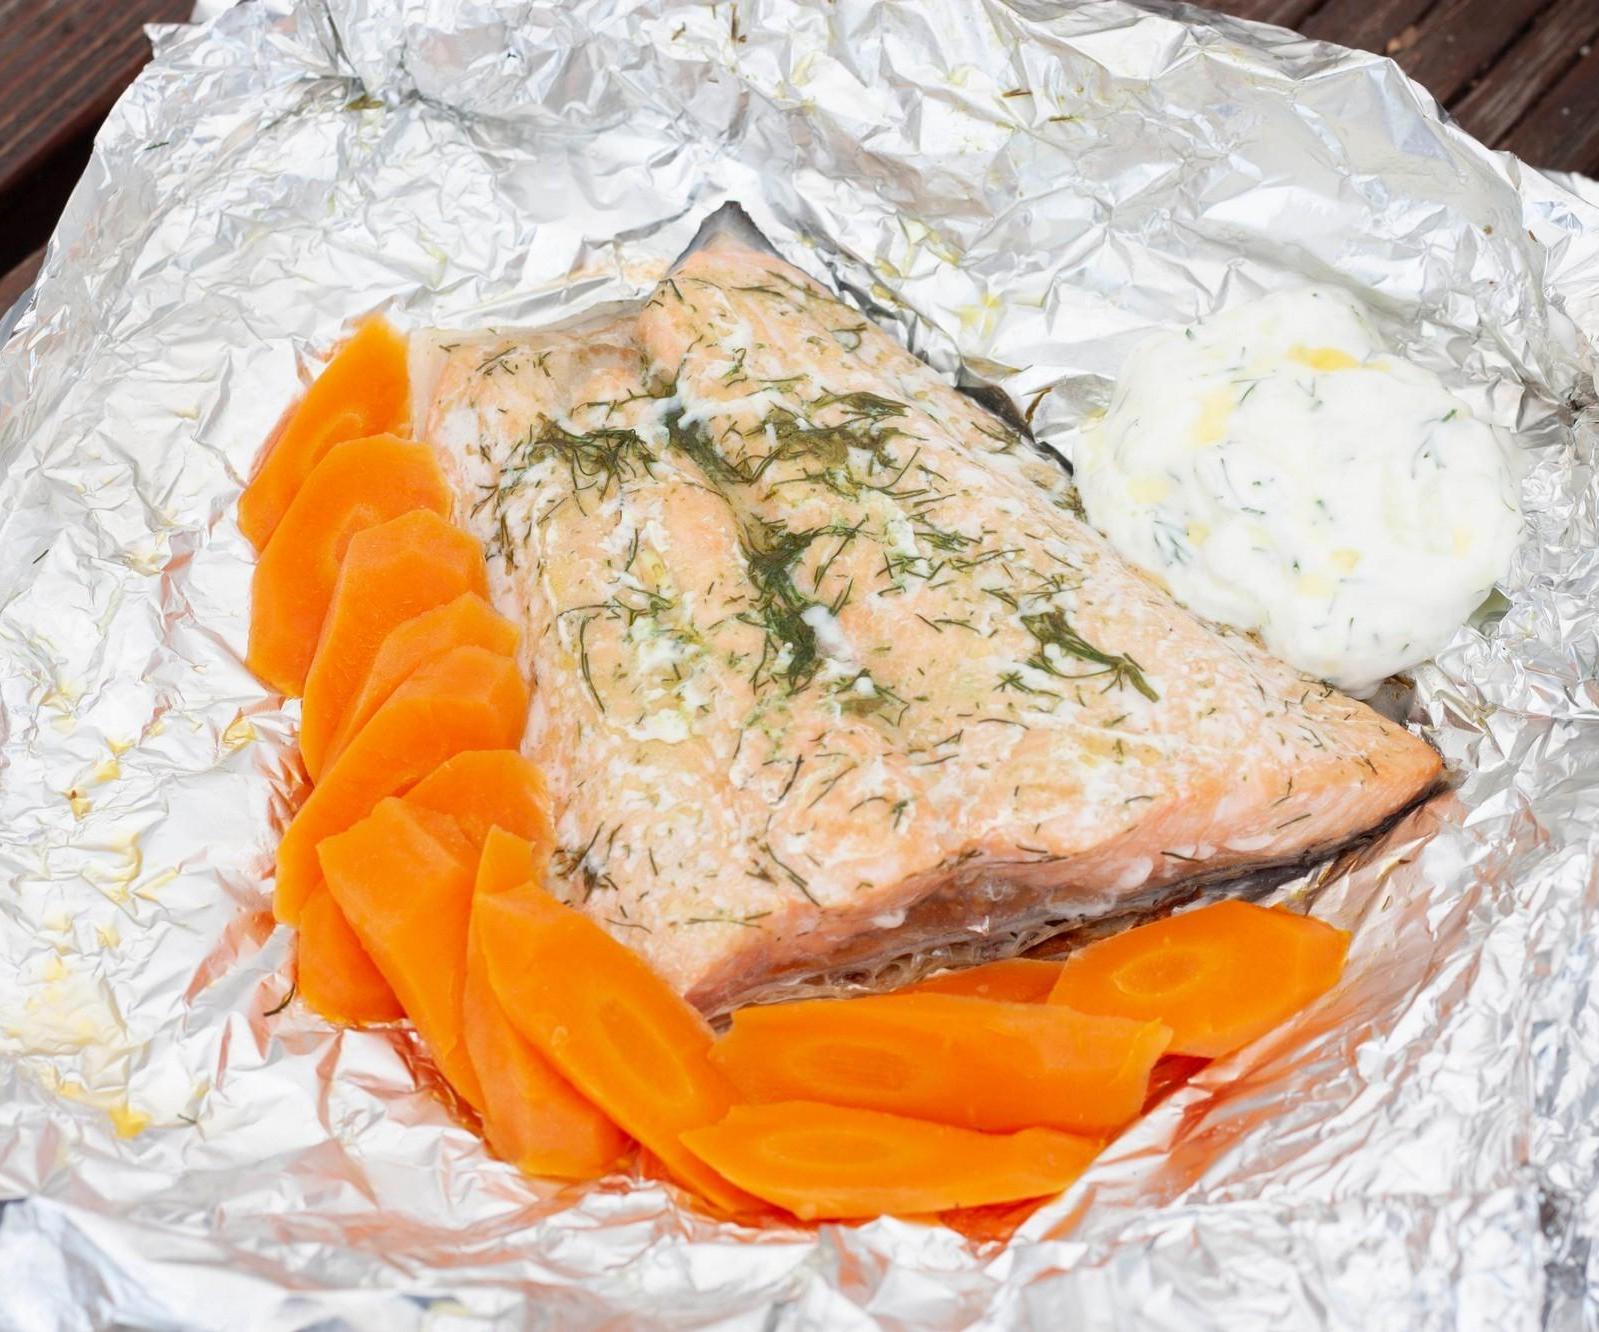 Dill-marinated Barbecue Salmon With Tzatziki